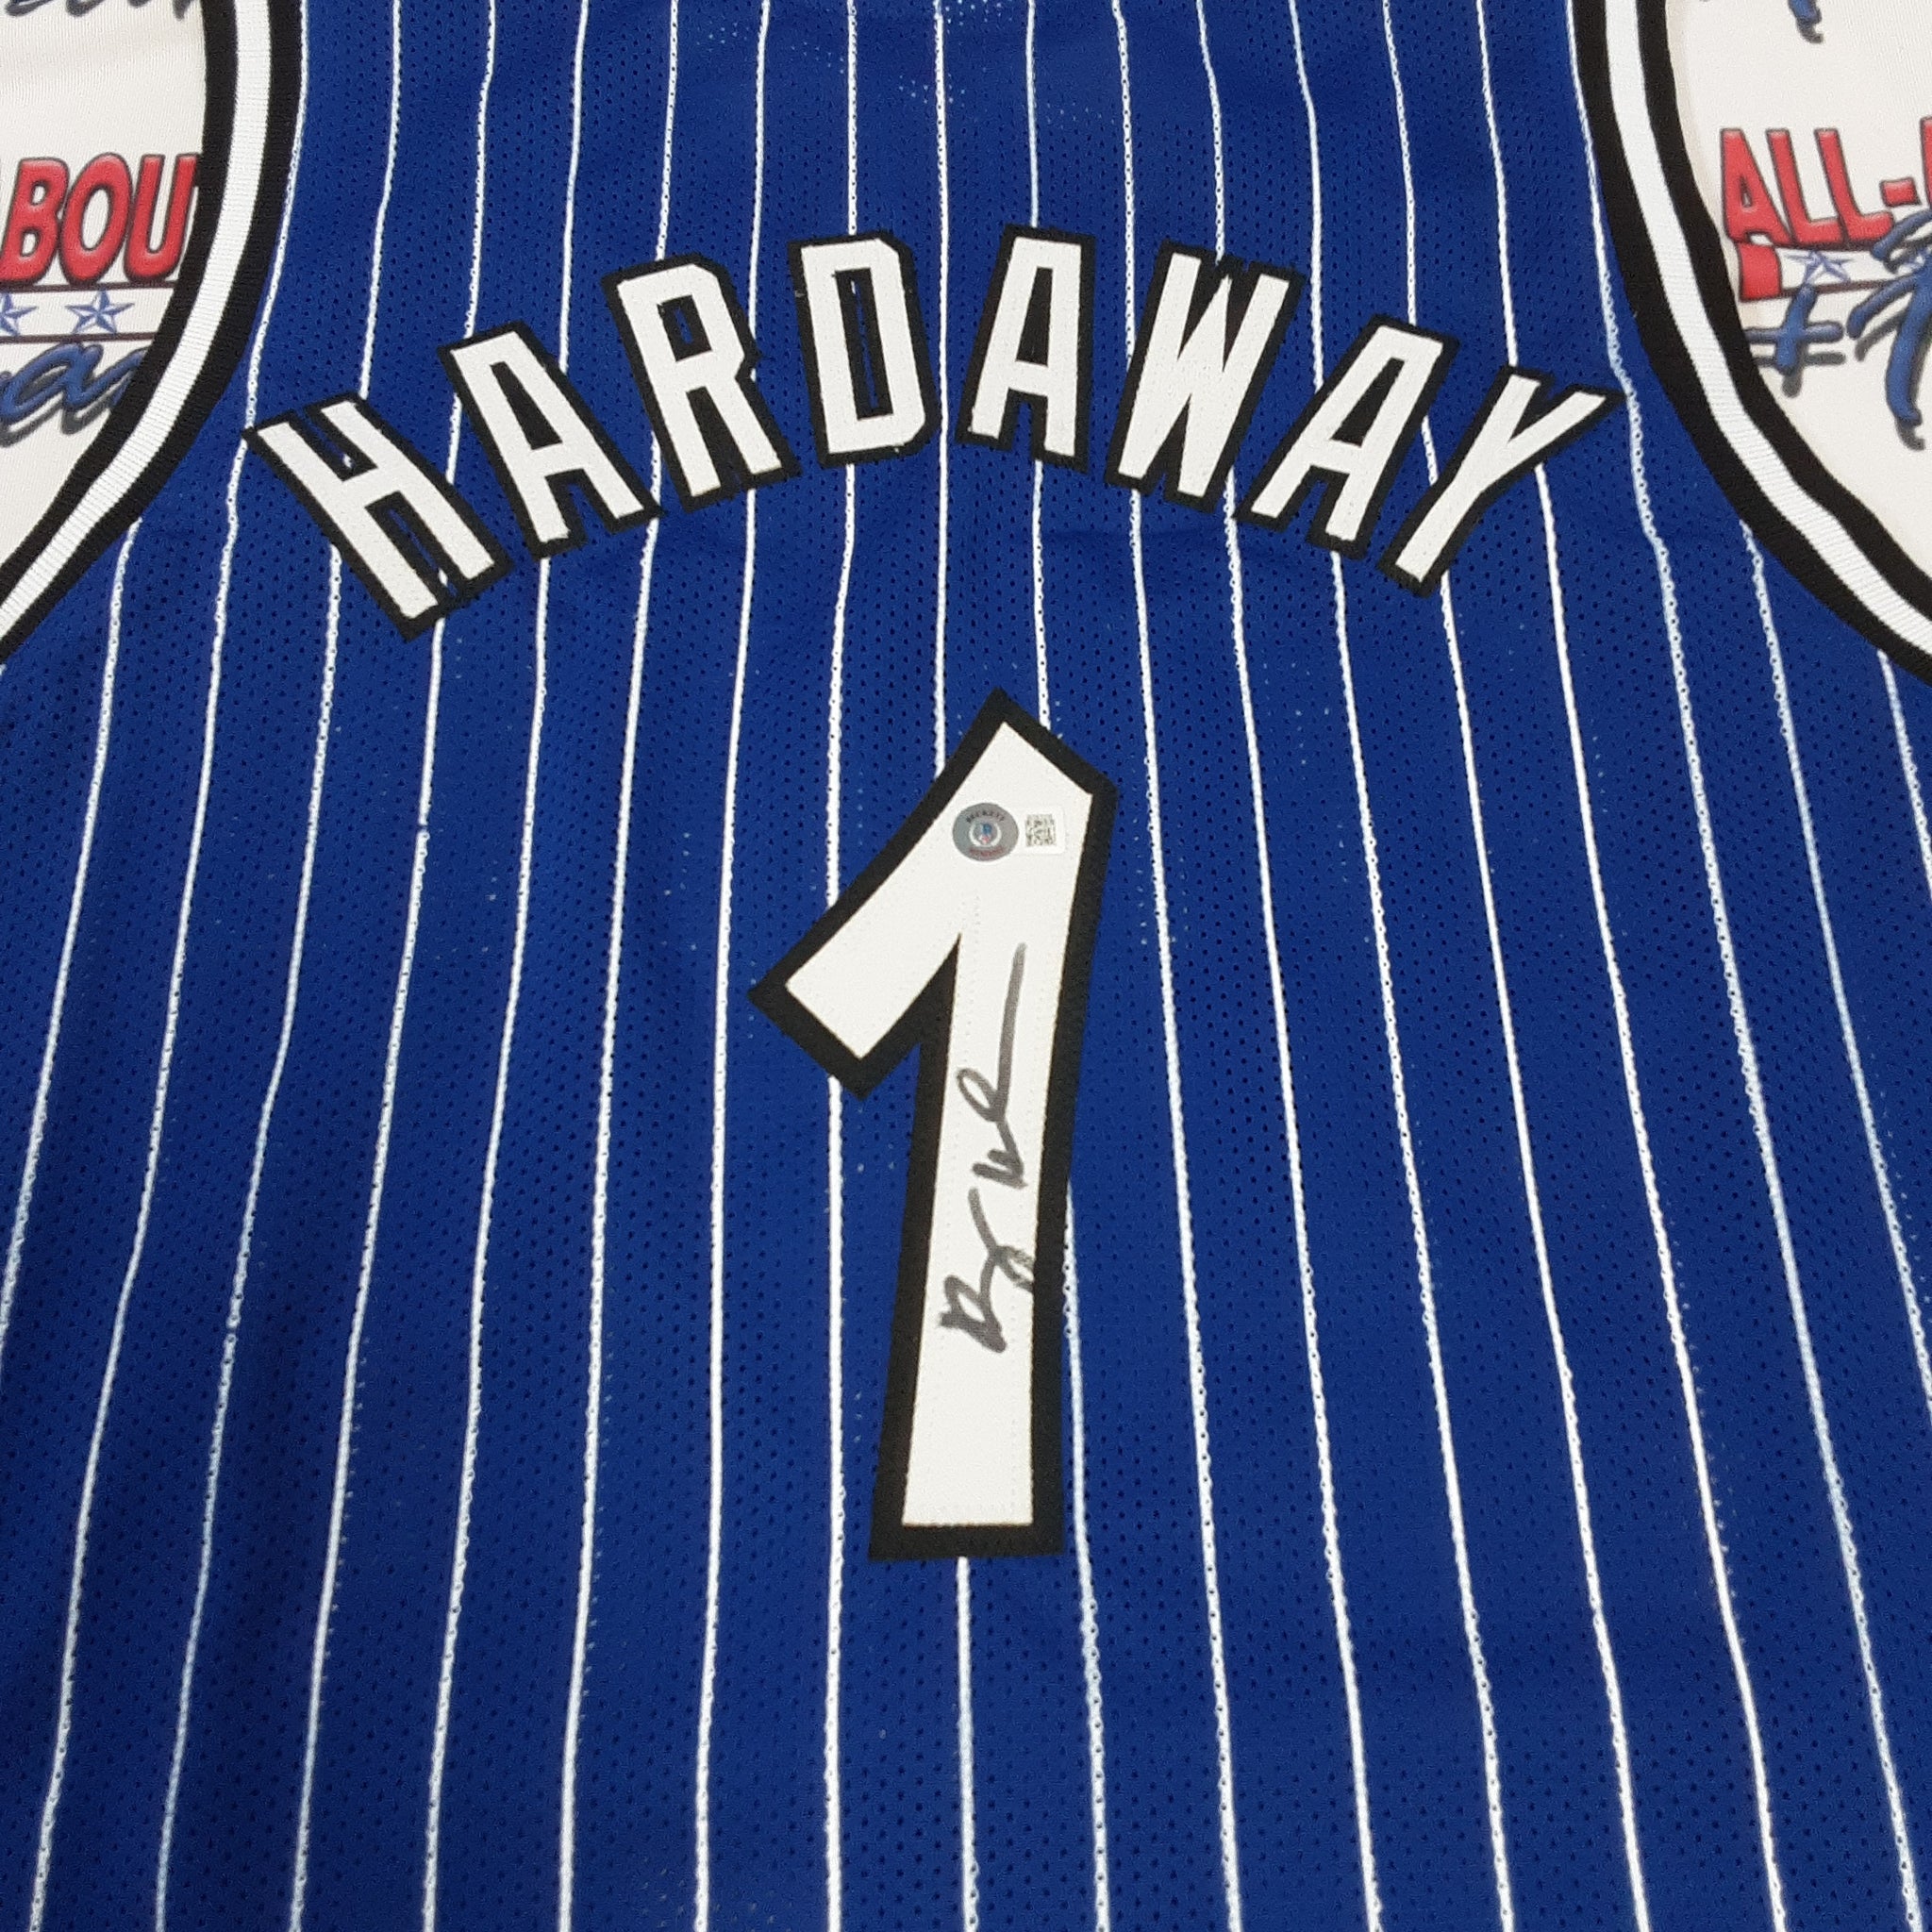 Anfernee Penny Hardaway Authentic Signed Pro Style Jersey Autographed